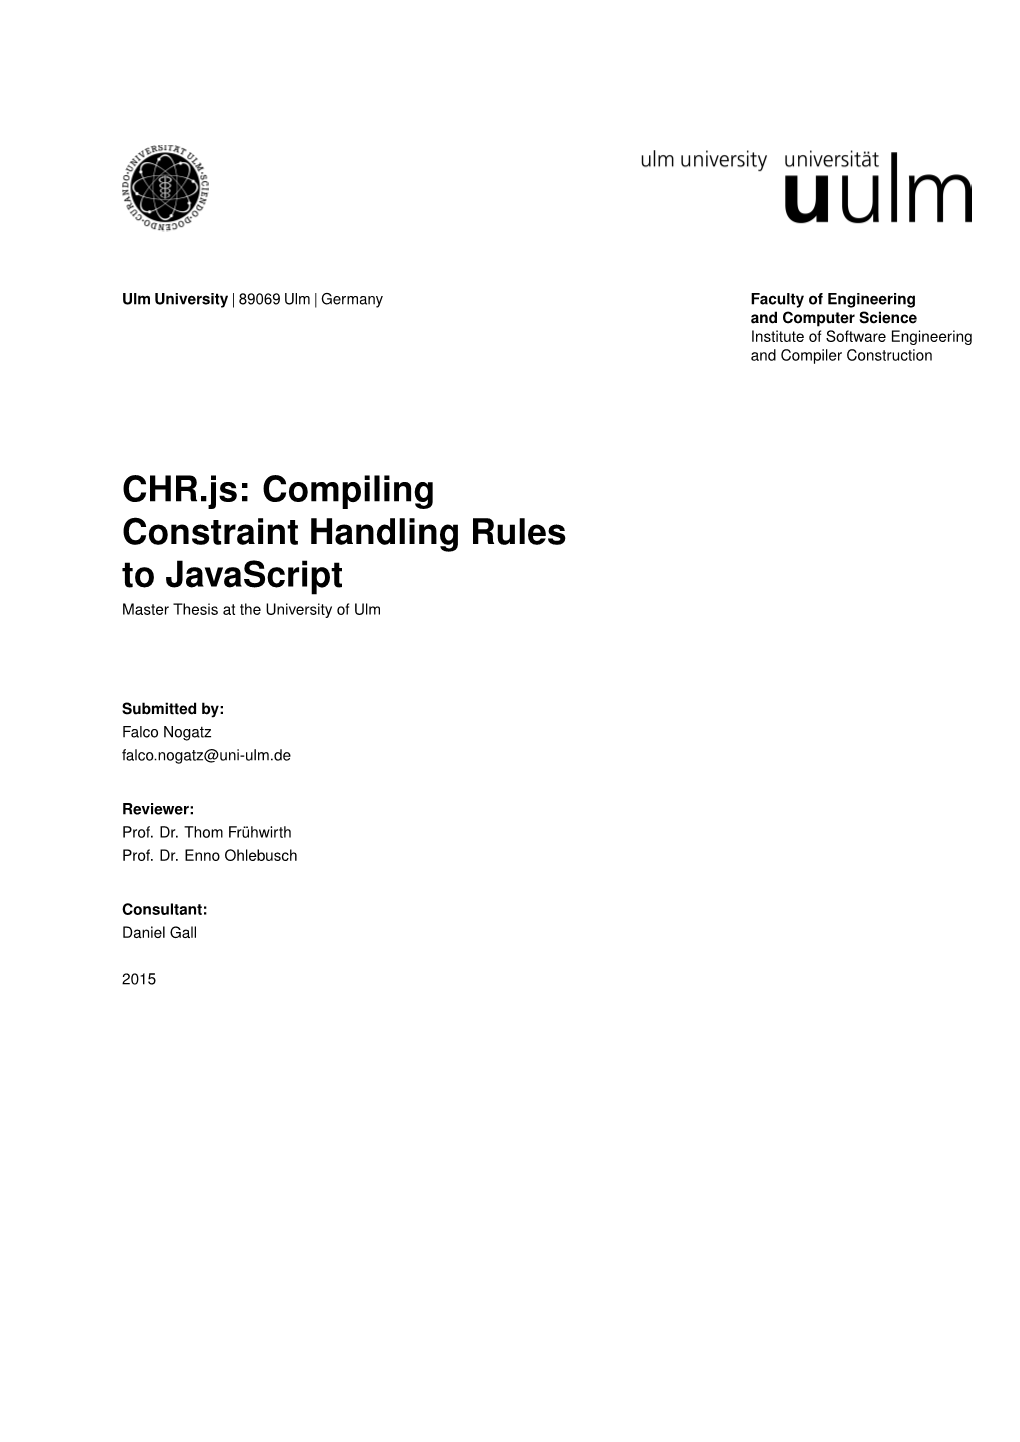 CHR.Js: Compiling Constraint Handling Rules to Javascript Master Thesis at the University of Ulm